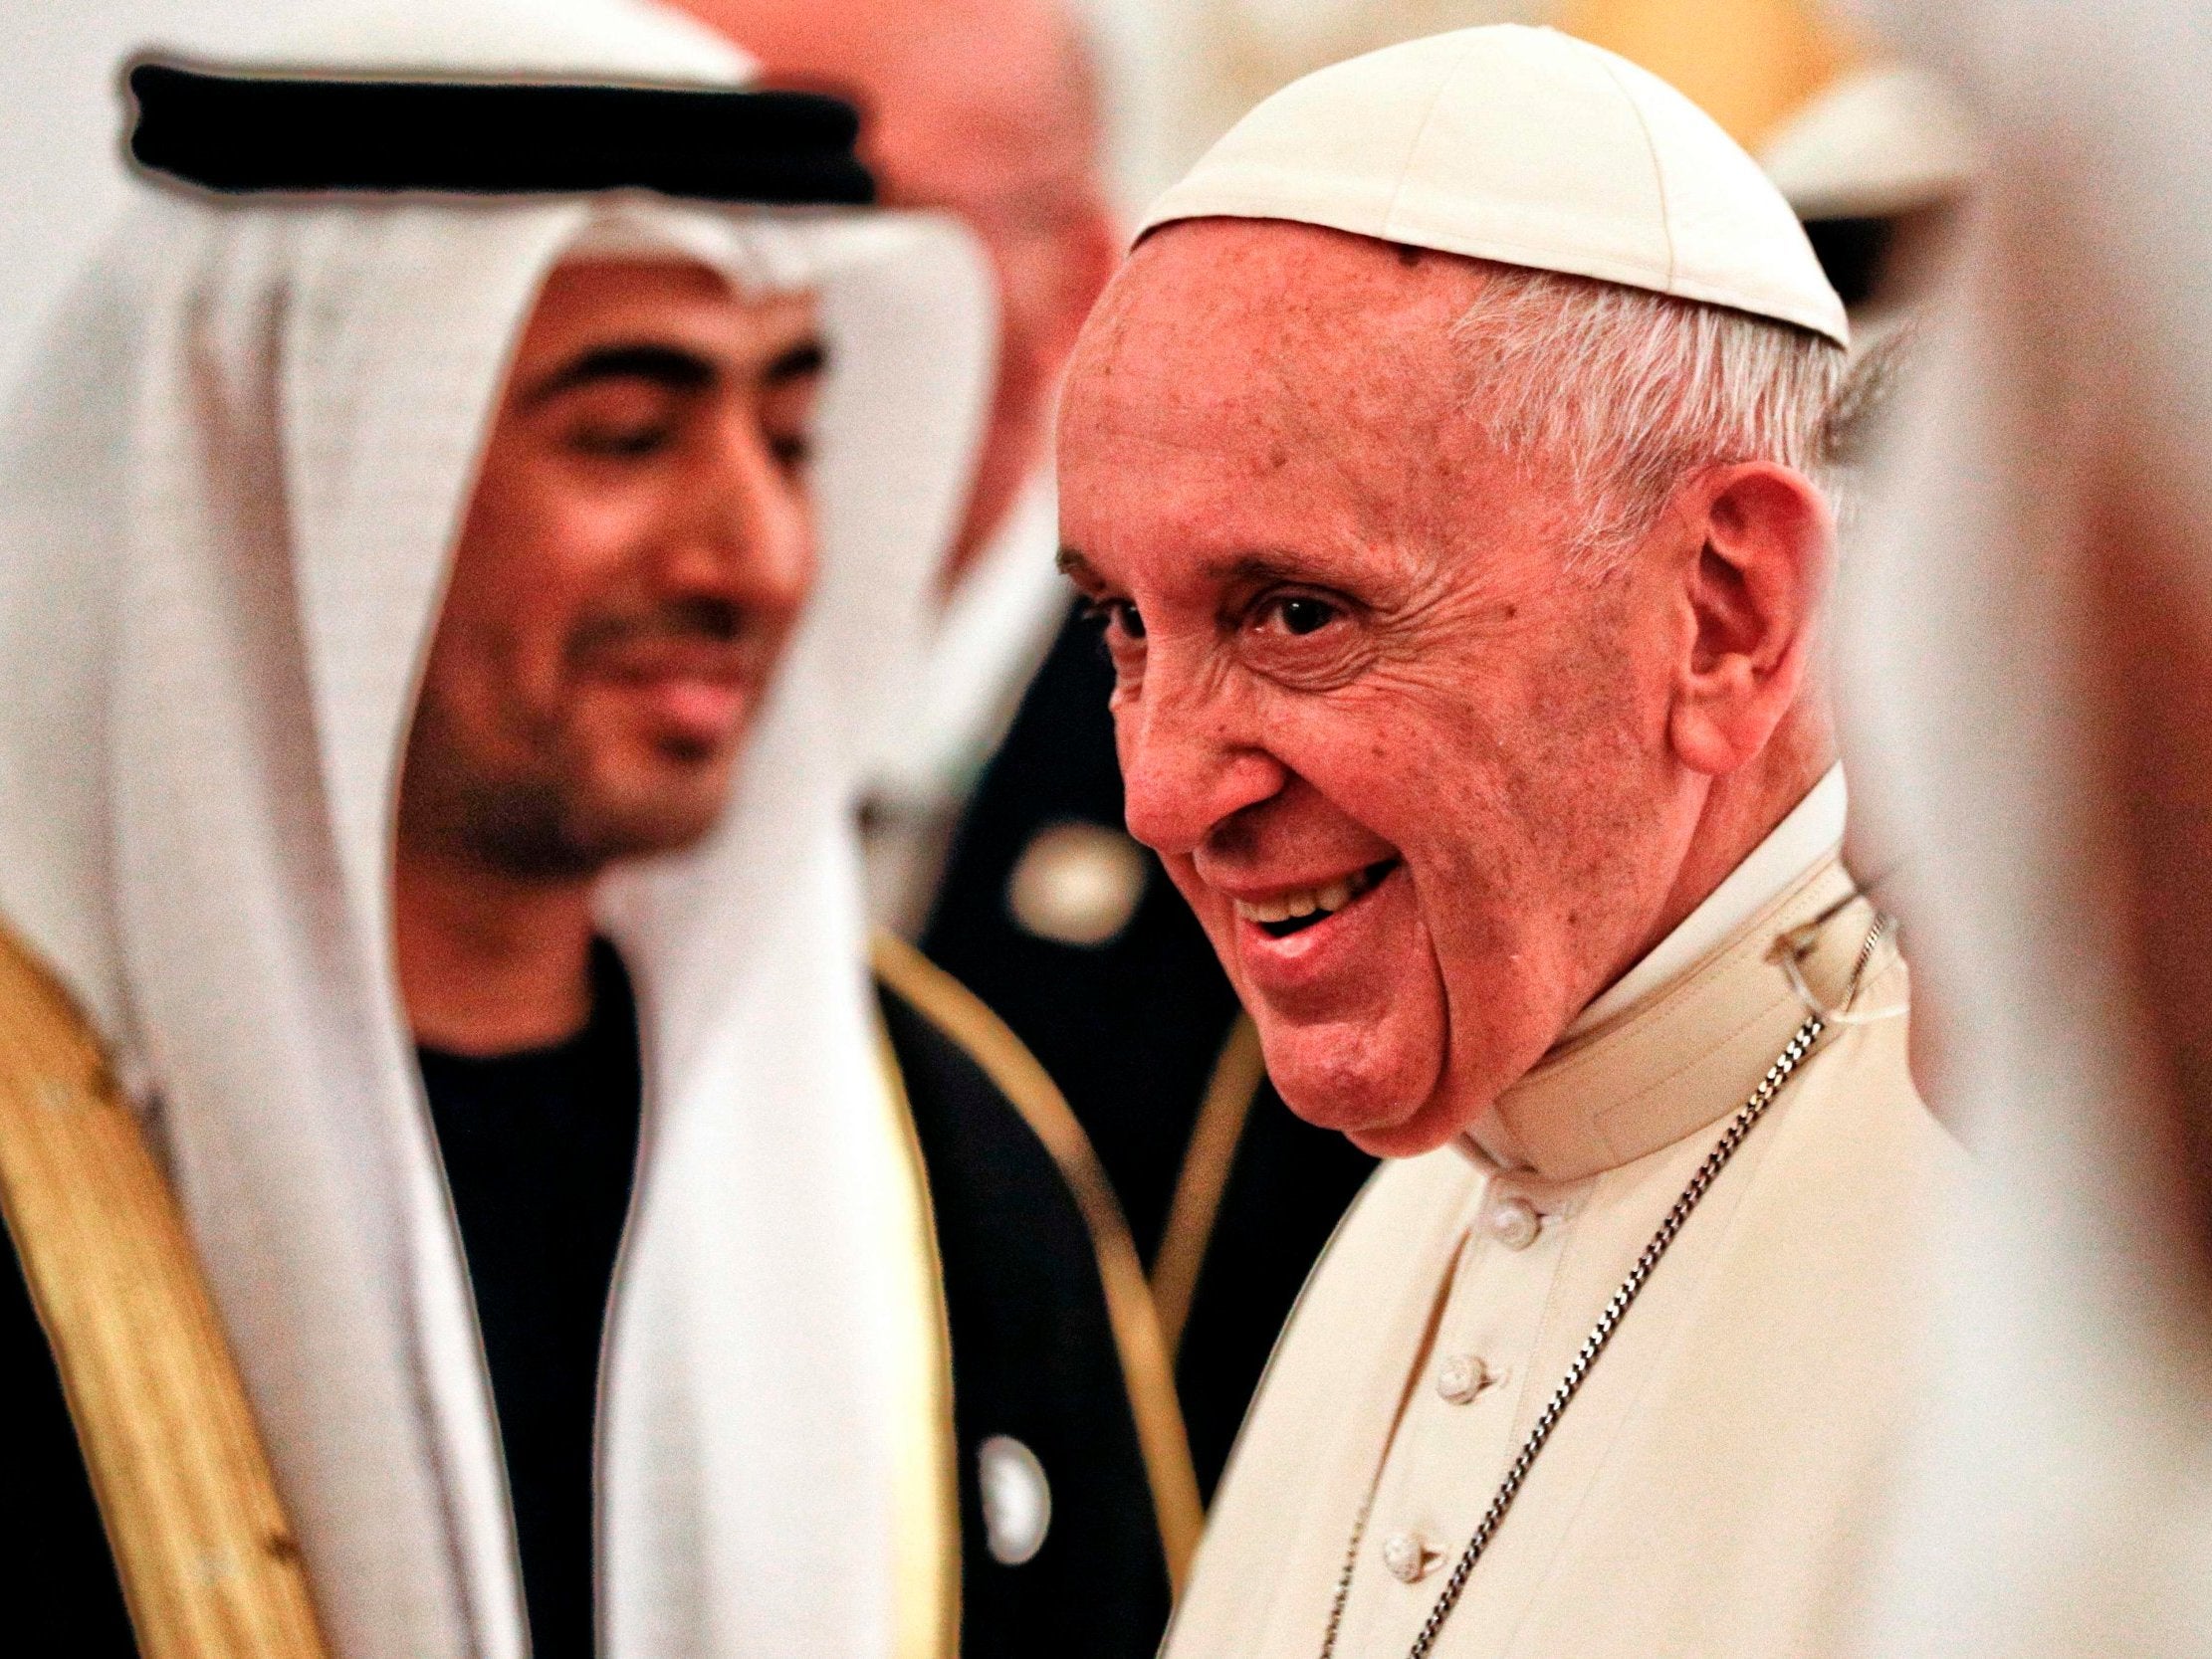 Pope Francis was welcomed by Abu Dhabi's Crown Prince Sheikh Mohammed bin Zayed al-Nahyan